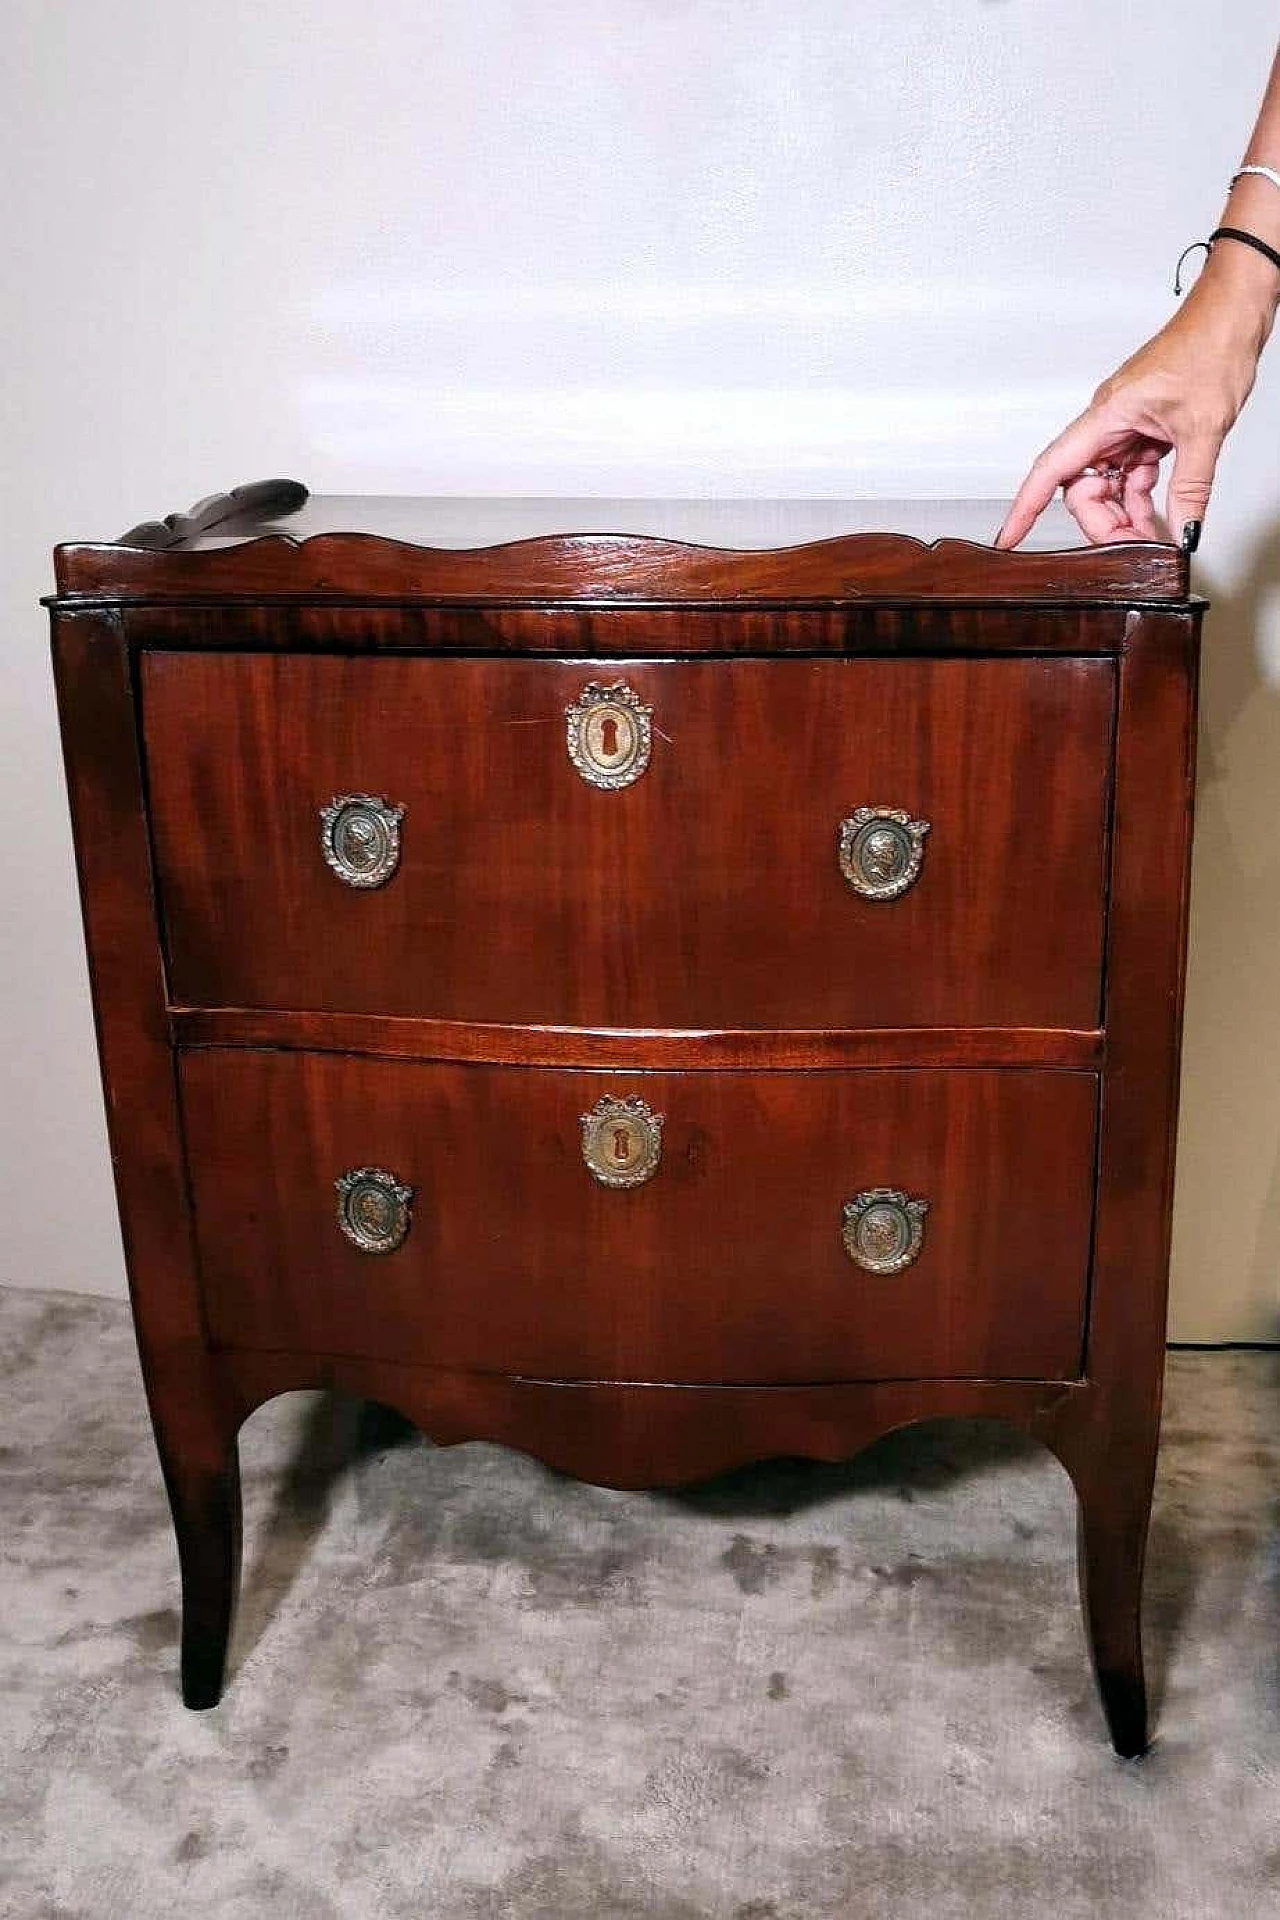 Neoclassical style chest of drawers in mahogany with bronze decorations, 18th century 1332983